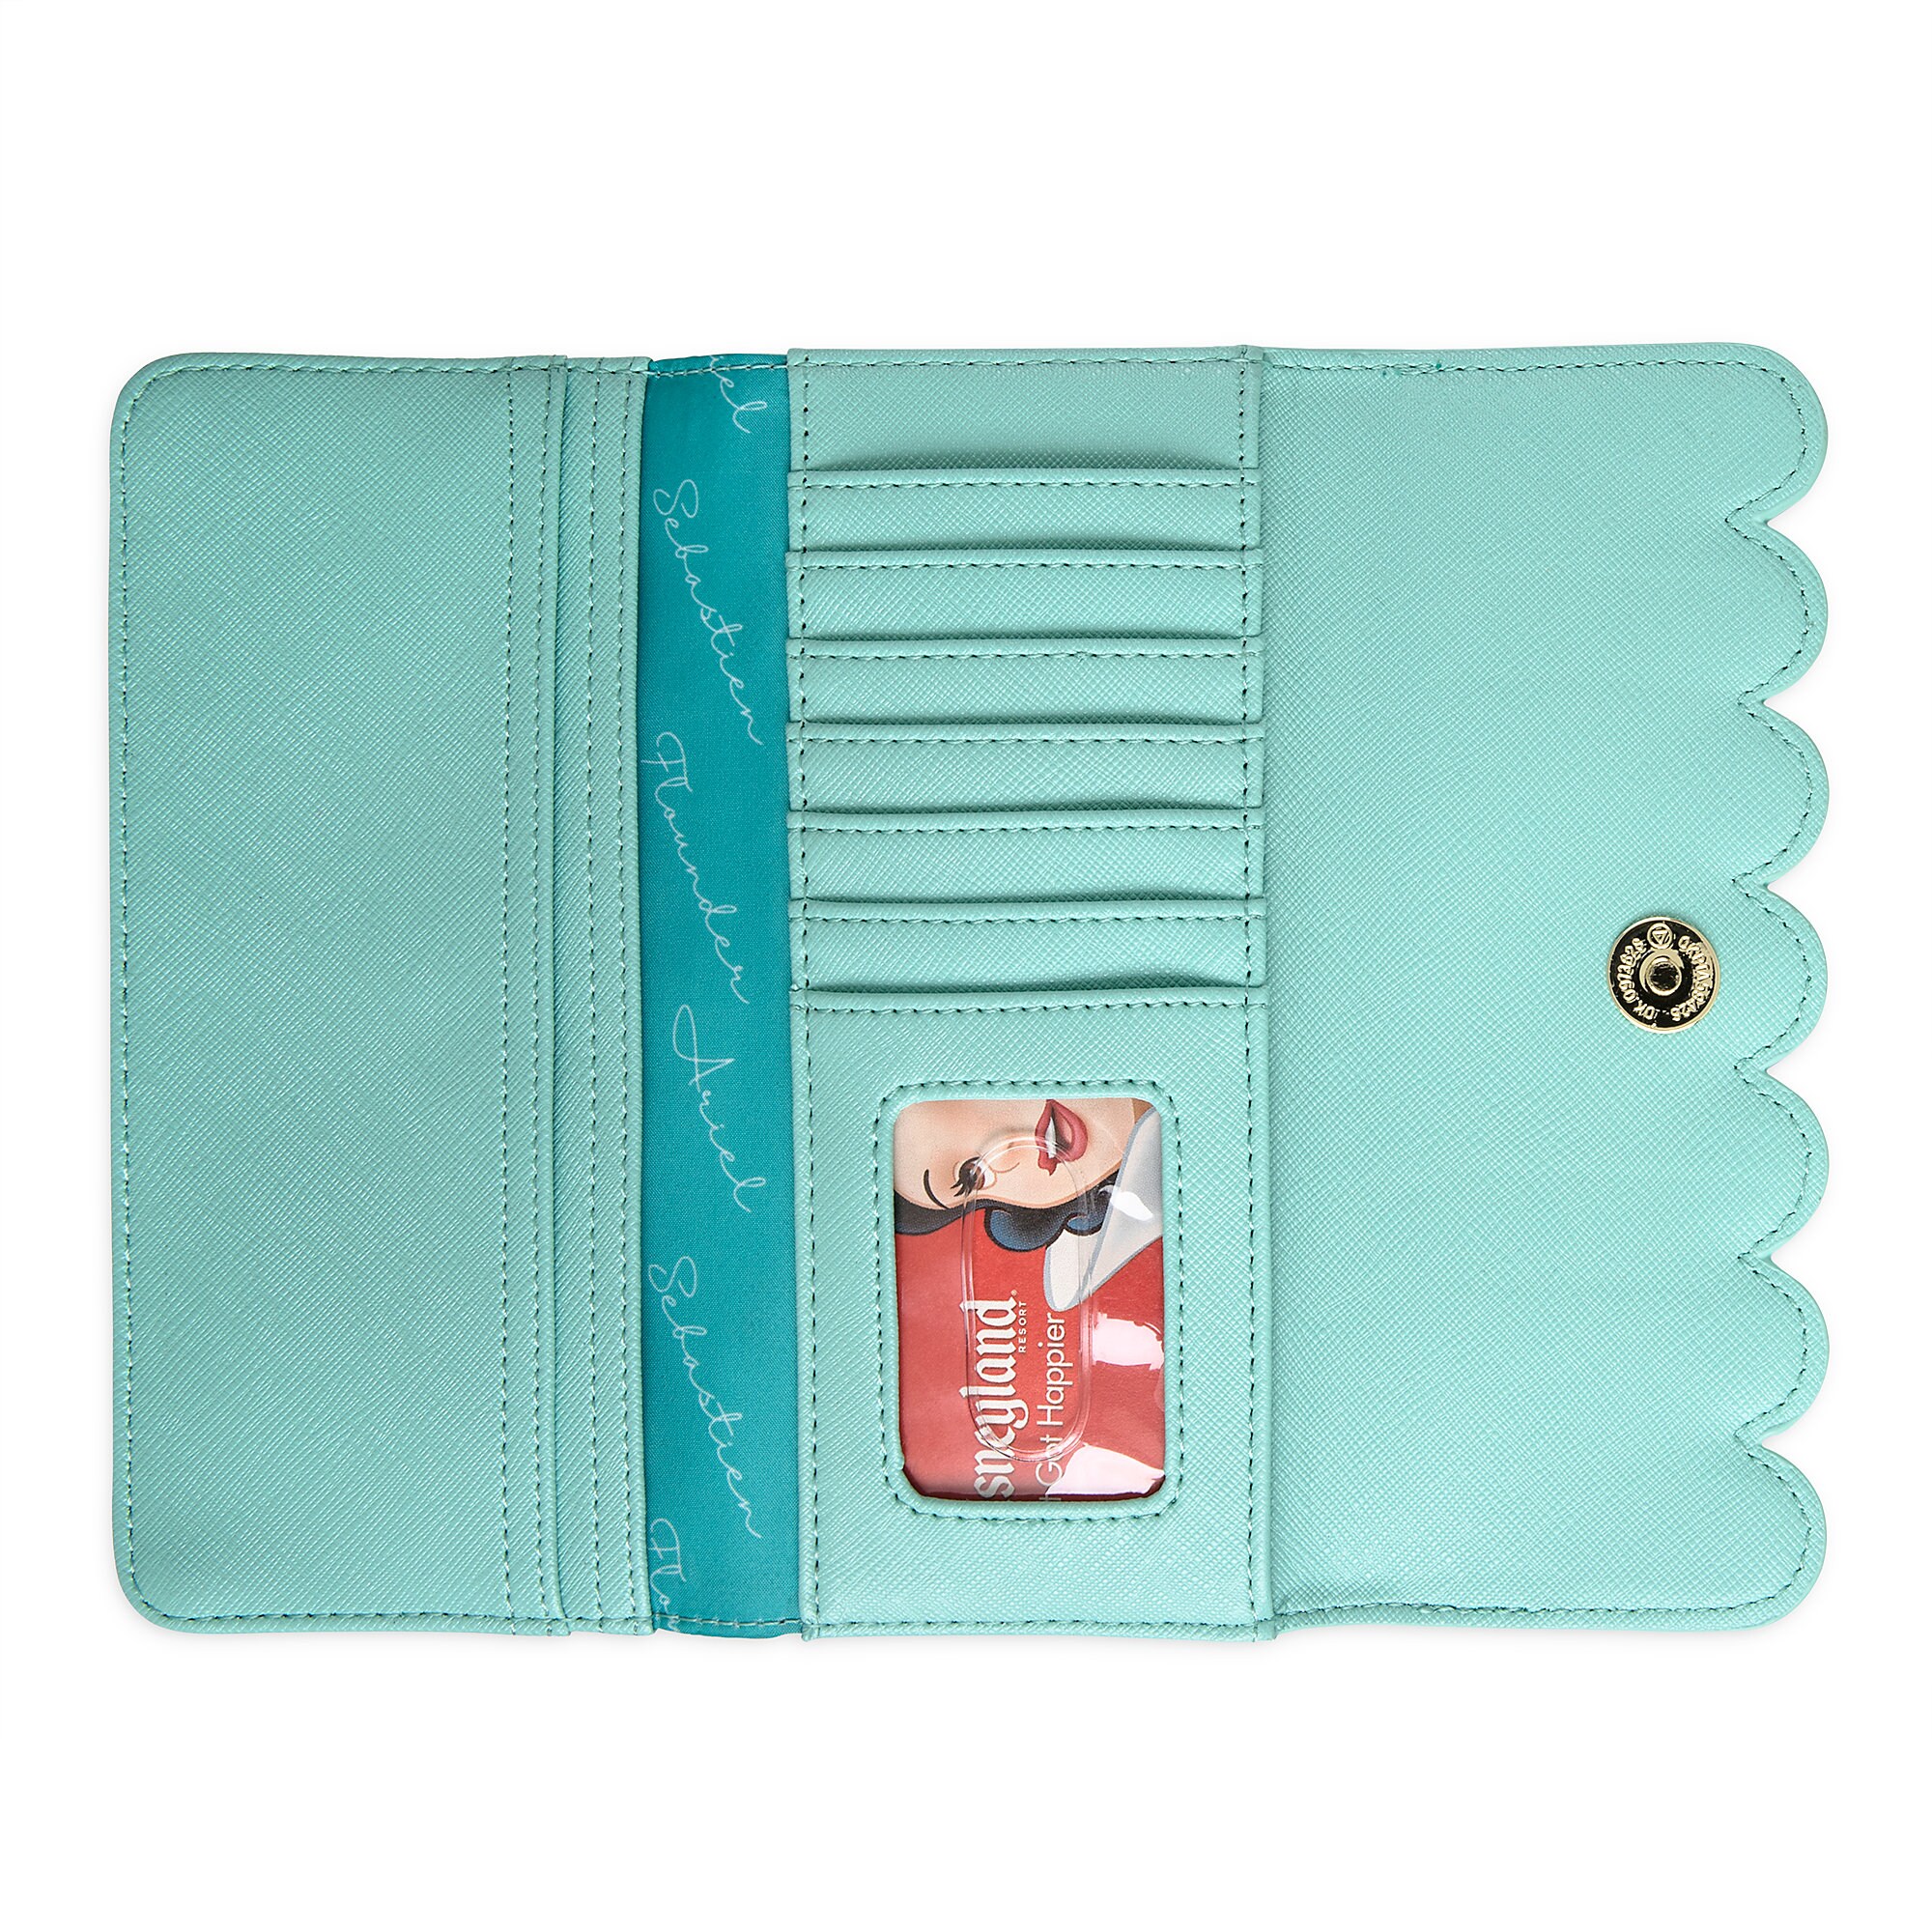 The Little Mermaid Wallet by Loungefly